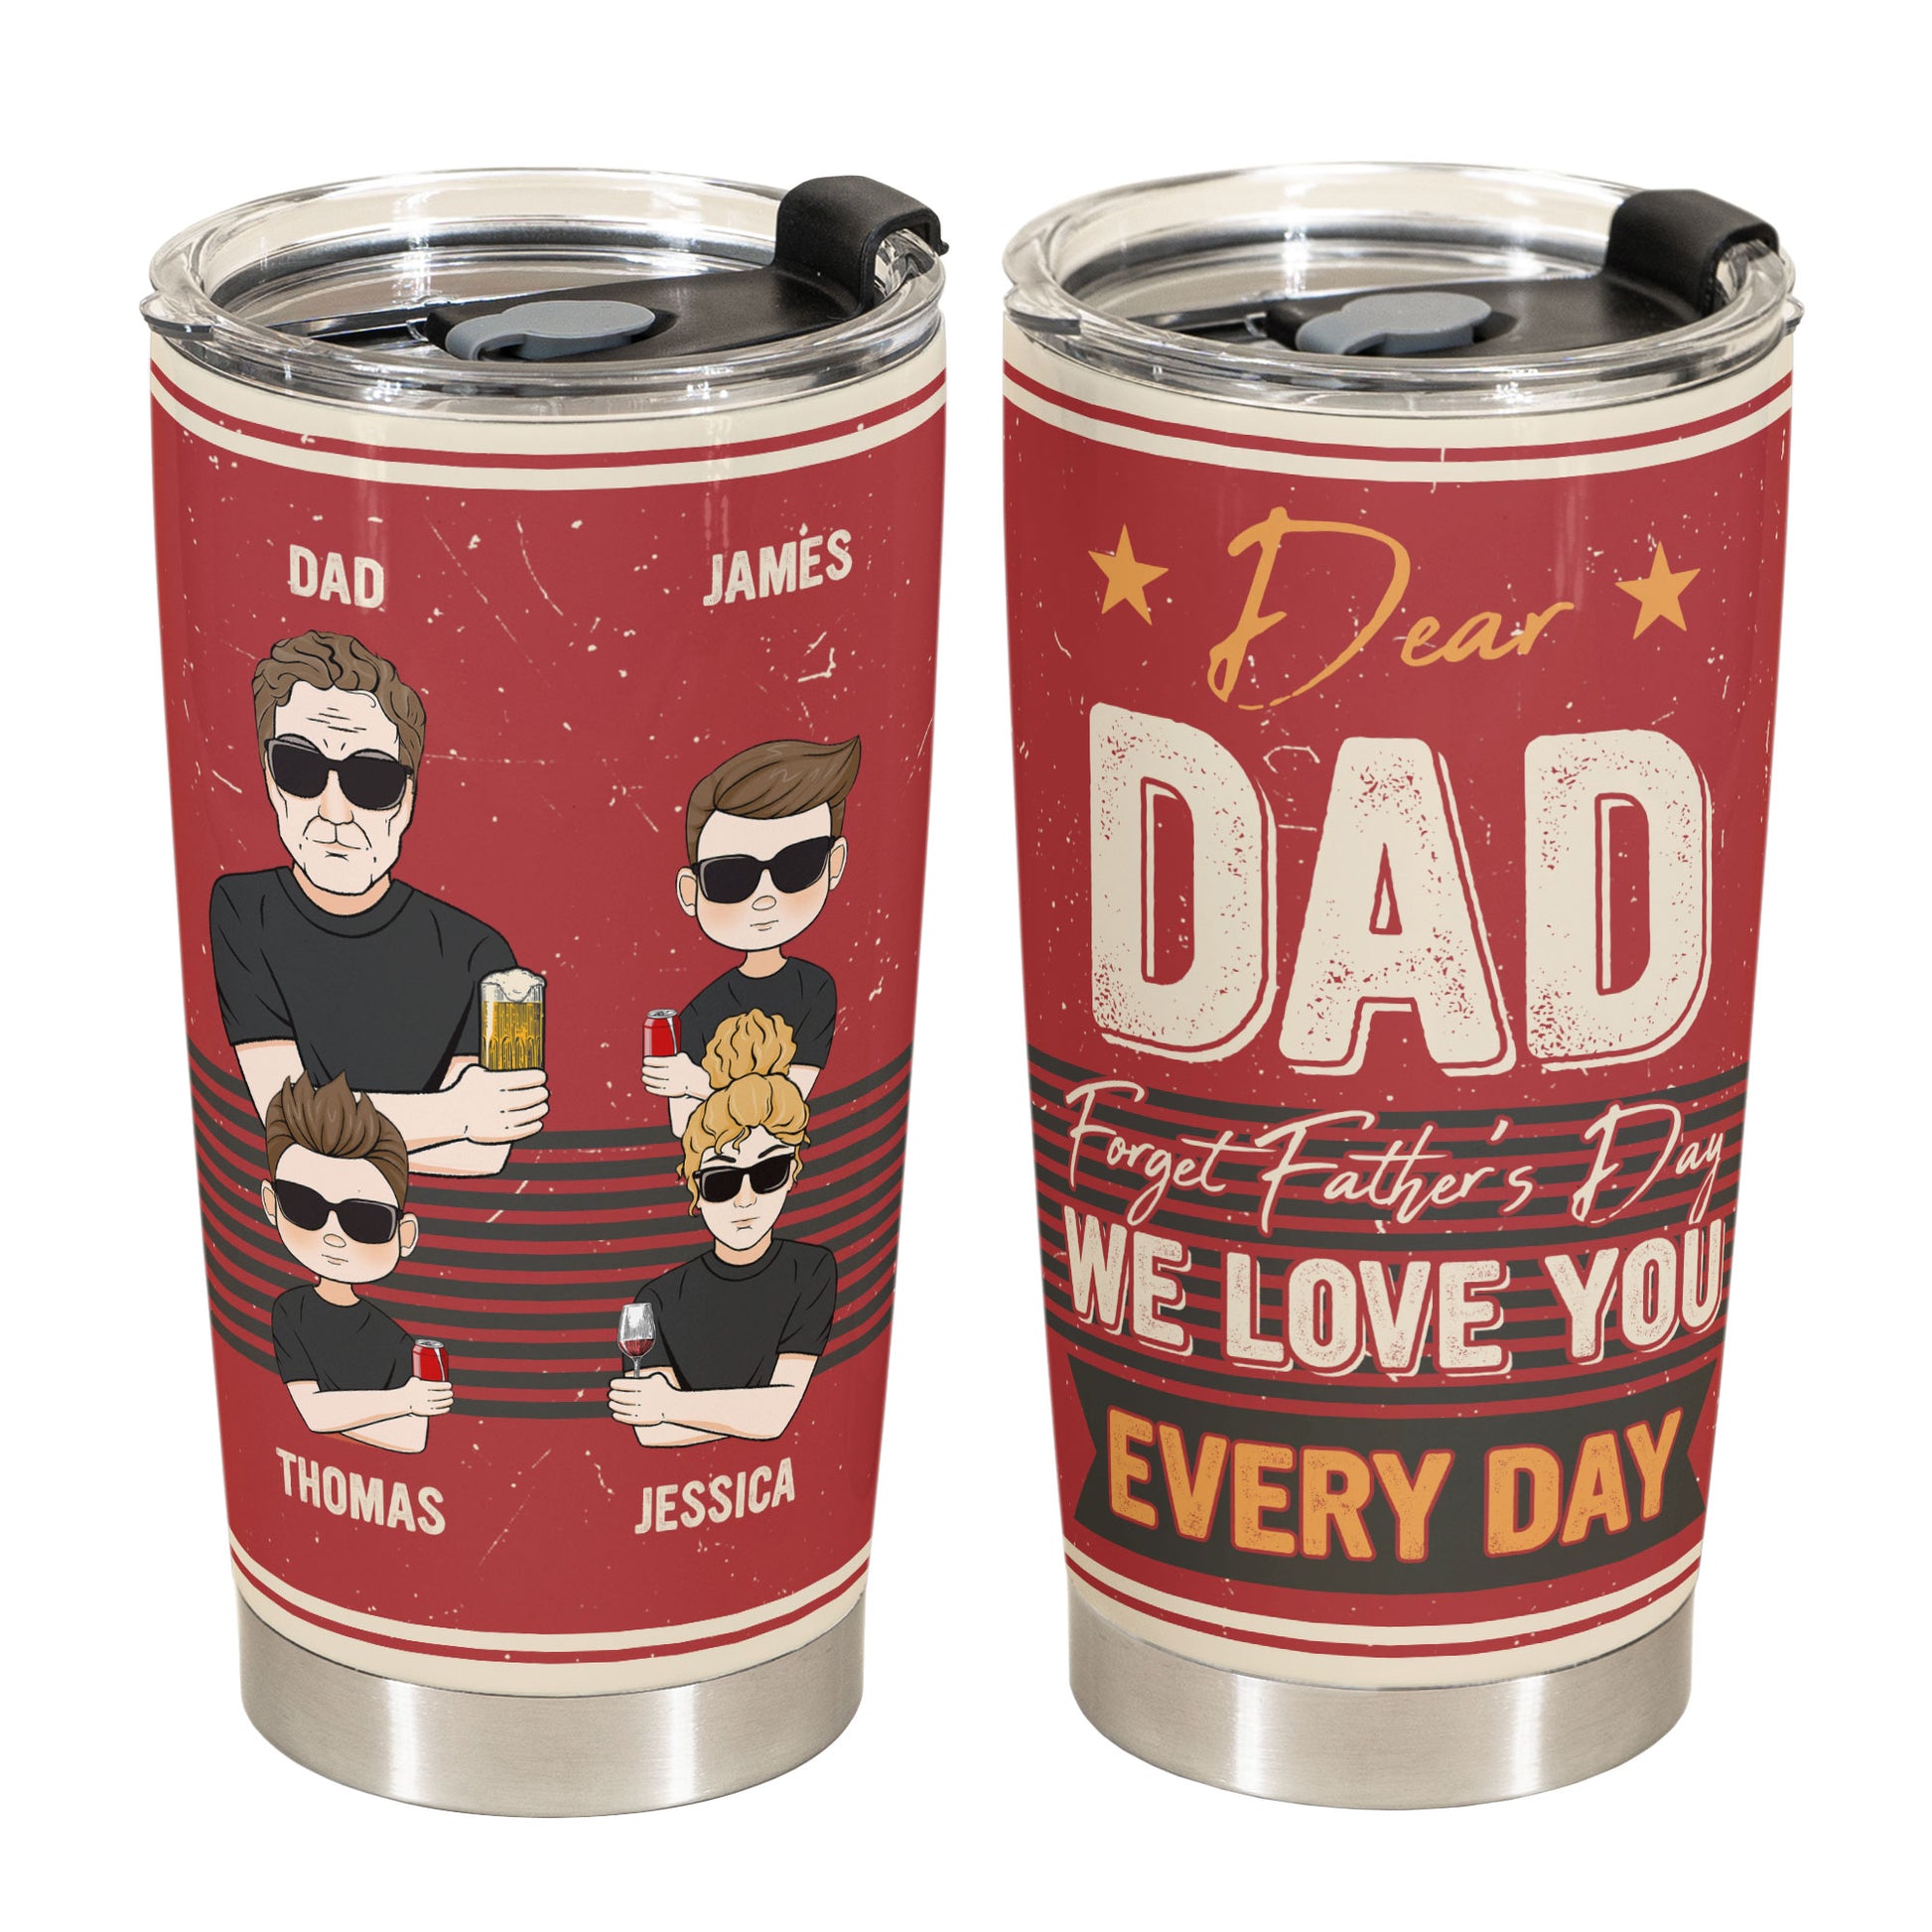 https://macorner.co/cdn/shop/files/Forget-Father_s-Day-We-Love-You-Everyday-Personalized-Tumbler-Cup2.jpg?v=1682580376&width=1946